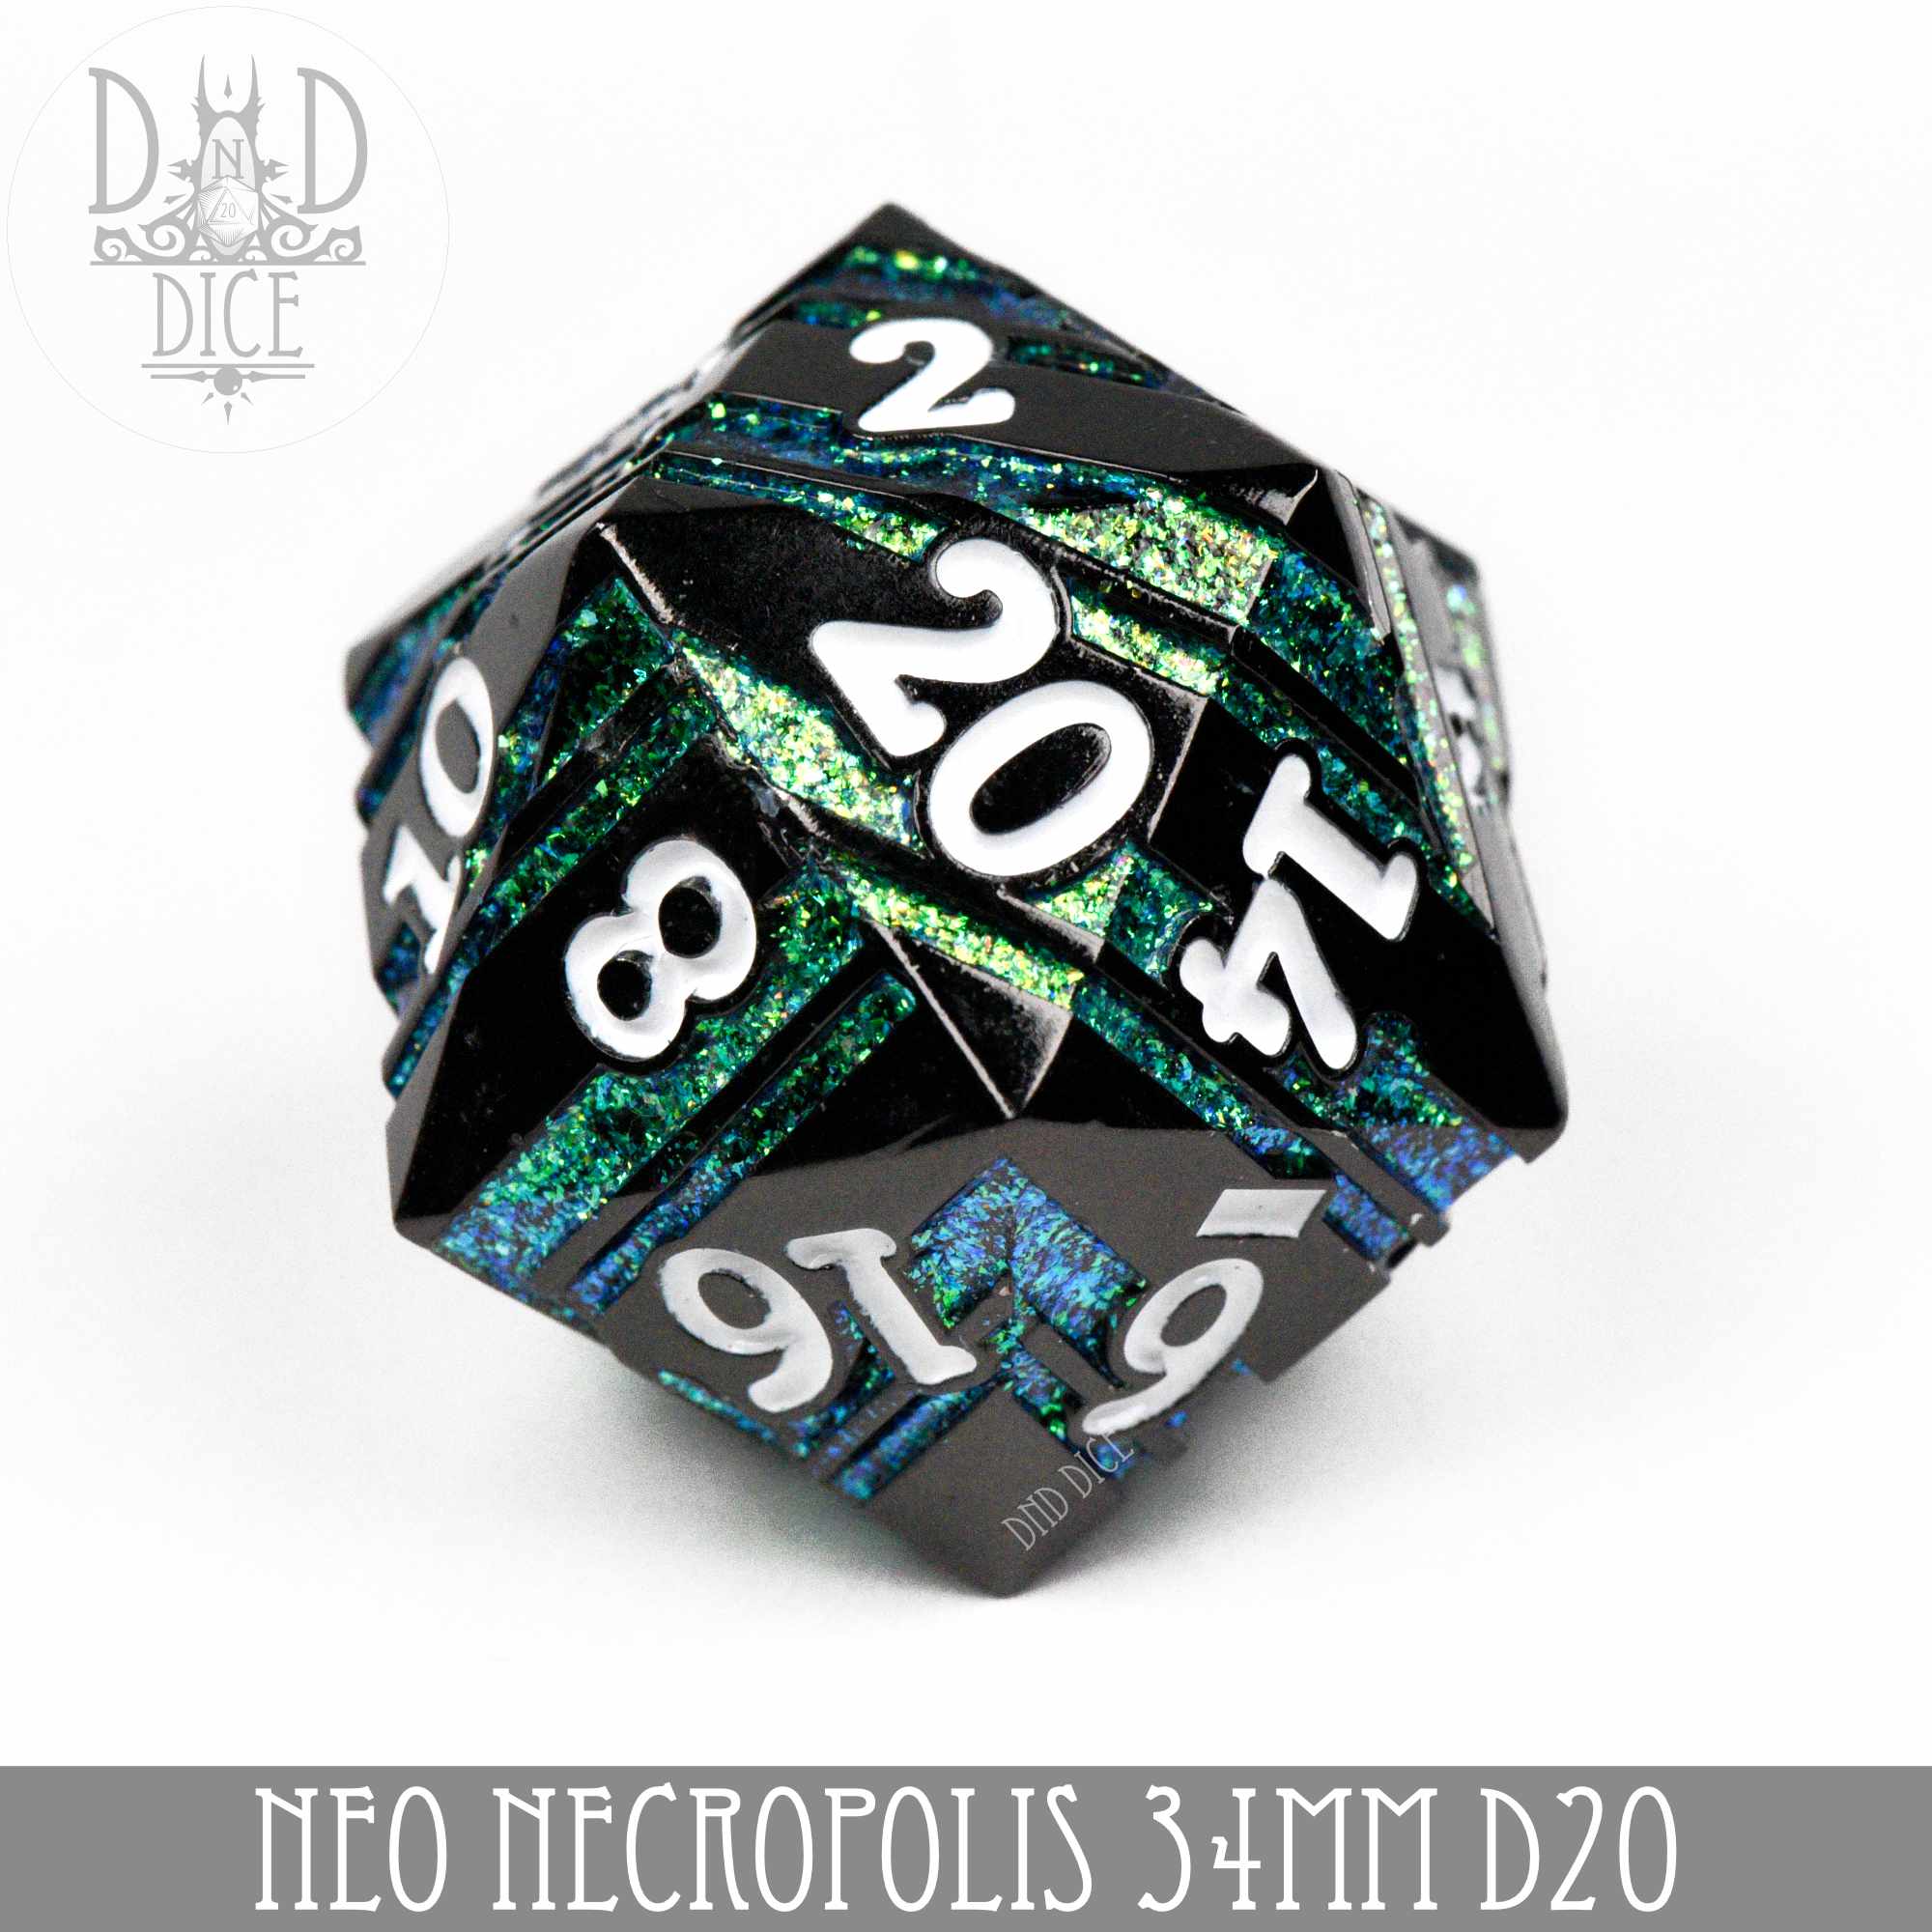 Opaque Dice - Black and Gold 34mm d20